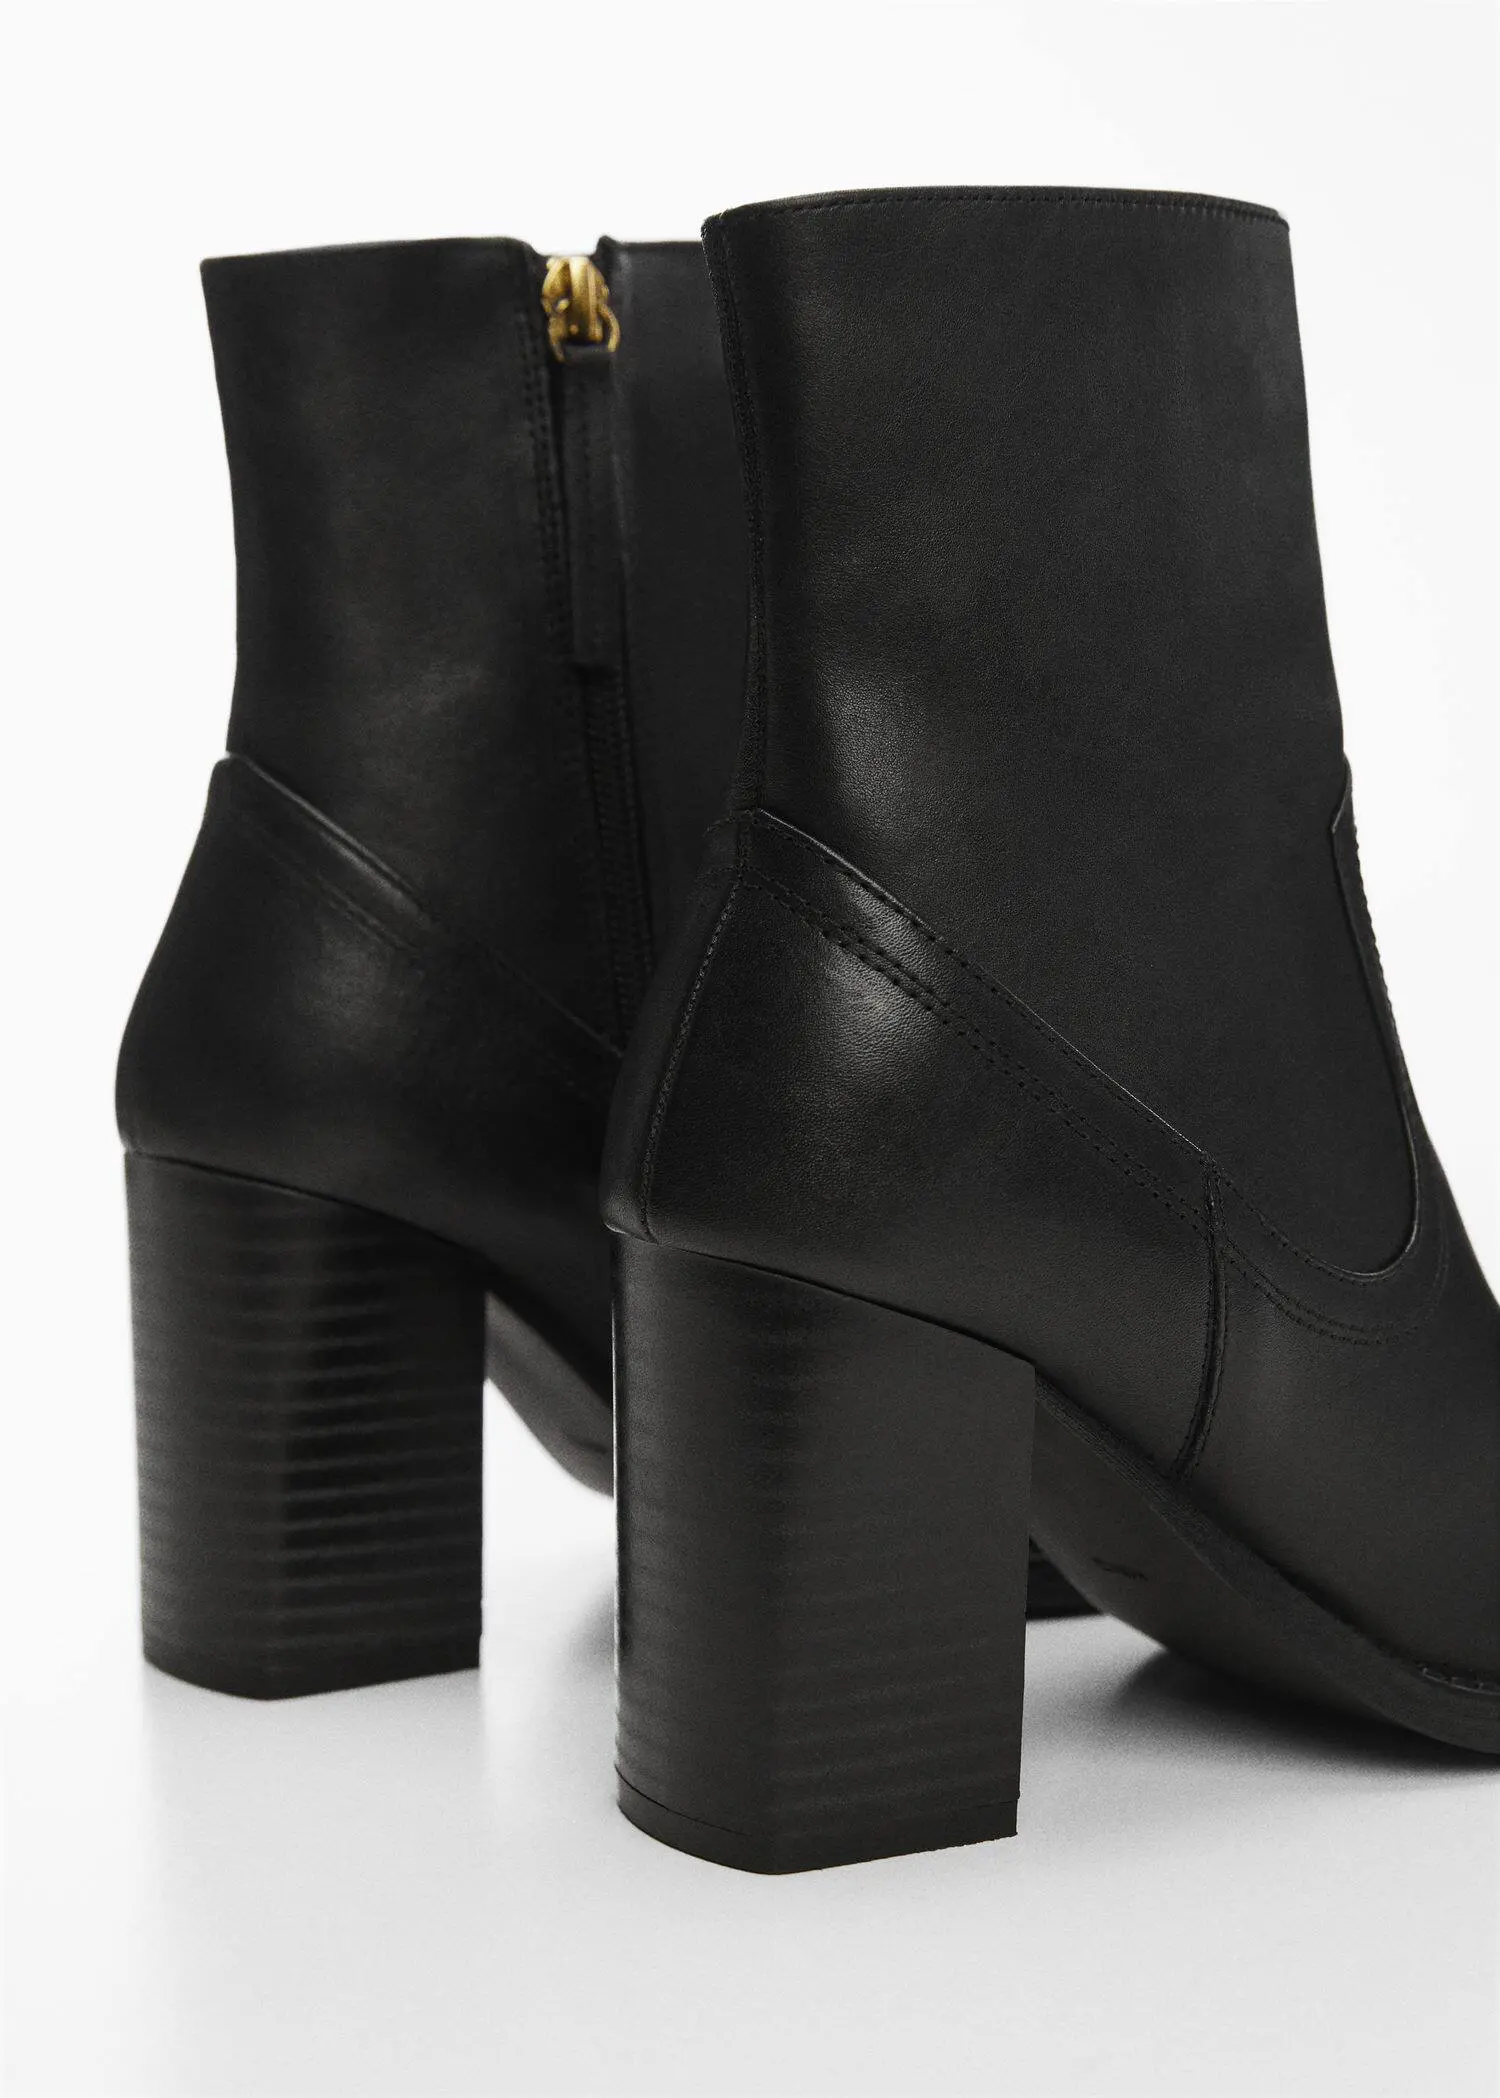 Mango Leather ankle boots with block heel. 3